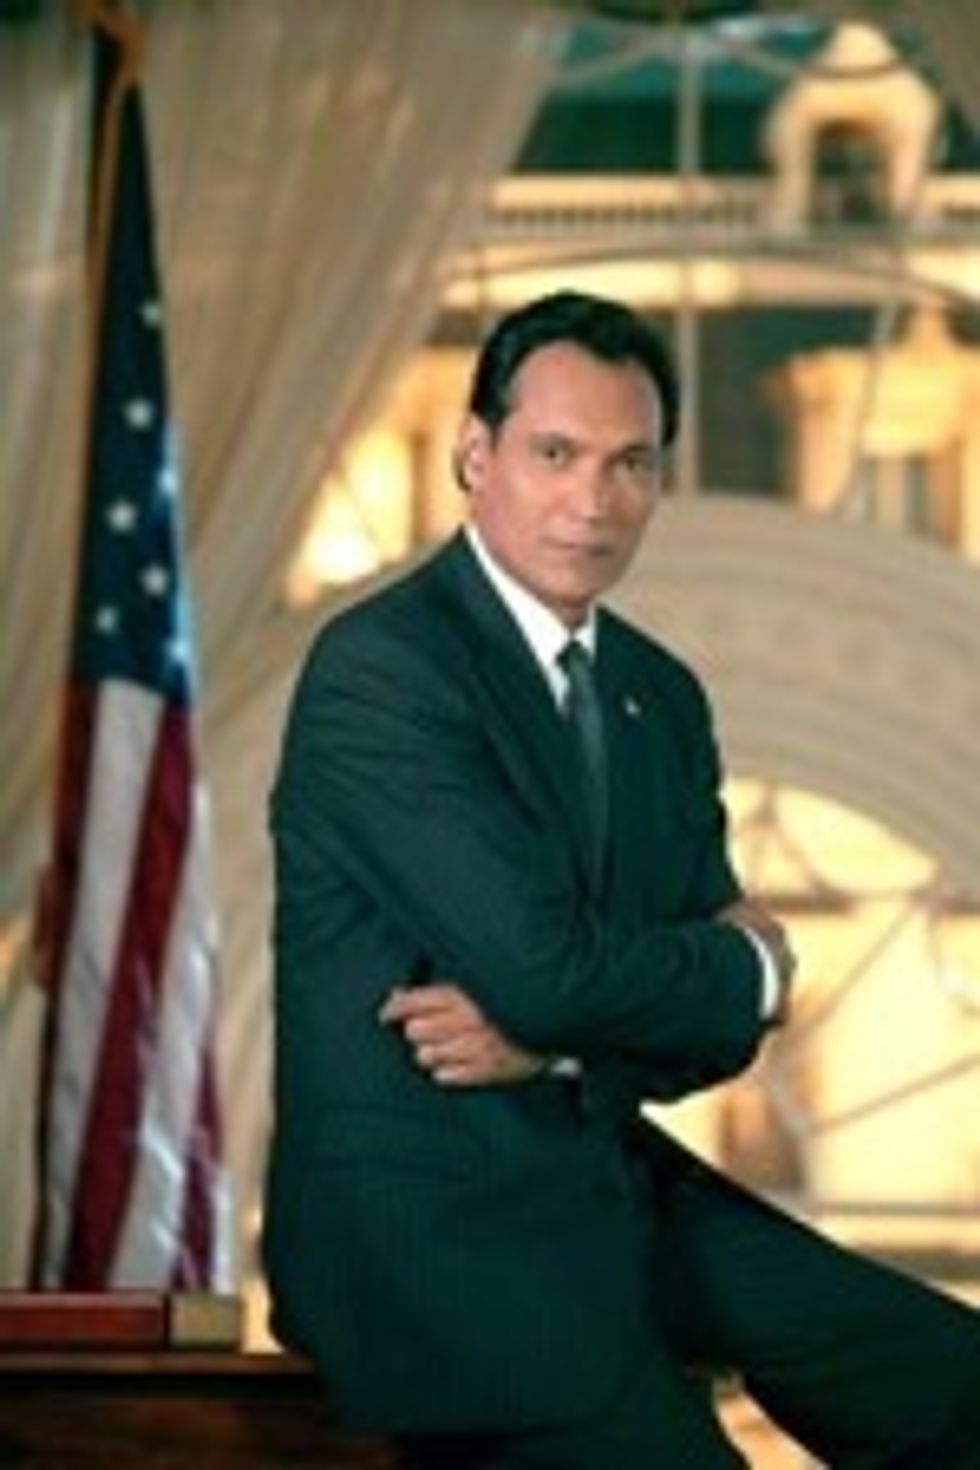 Jimmy Smits Used To Play Barack Obama In Future-Predicting TV Show 'The West Wing'